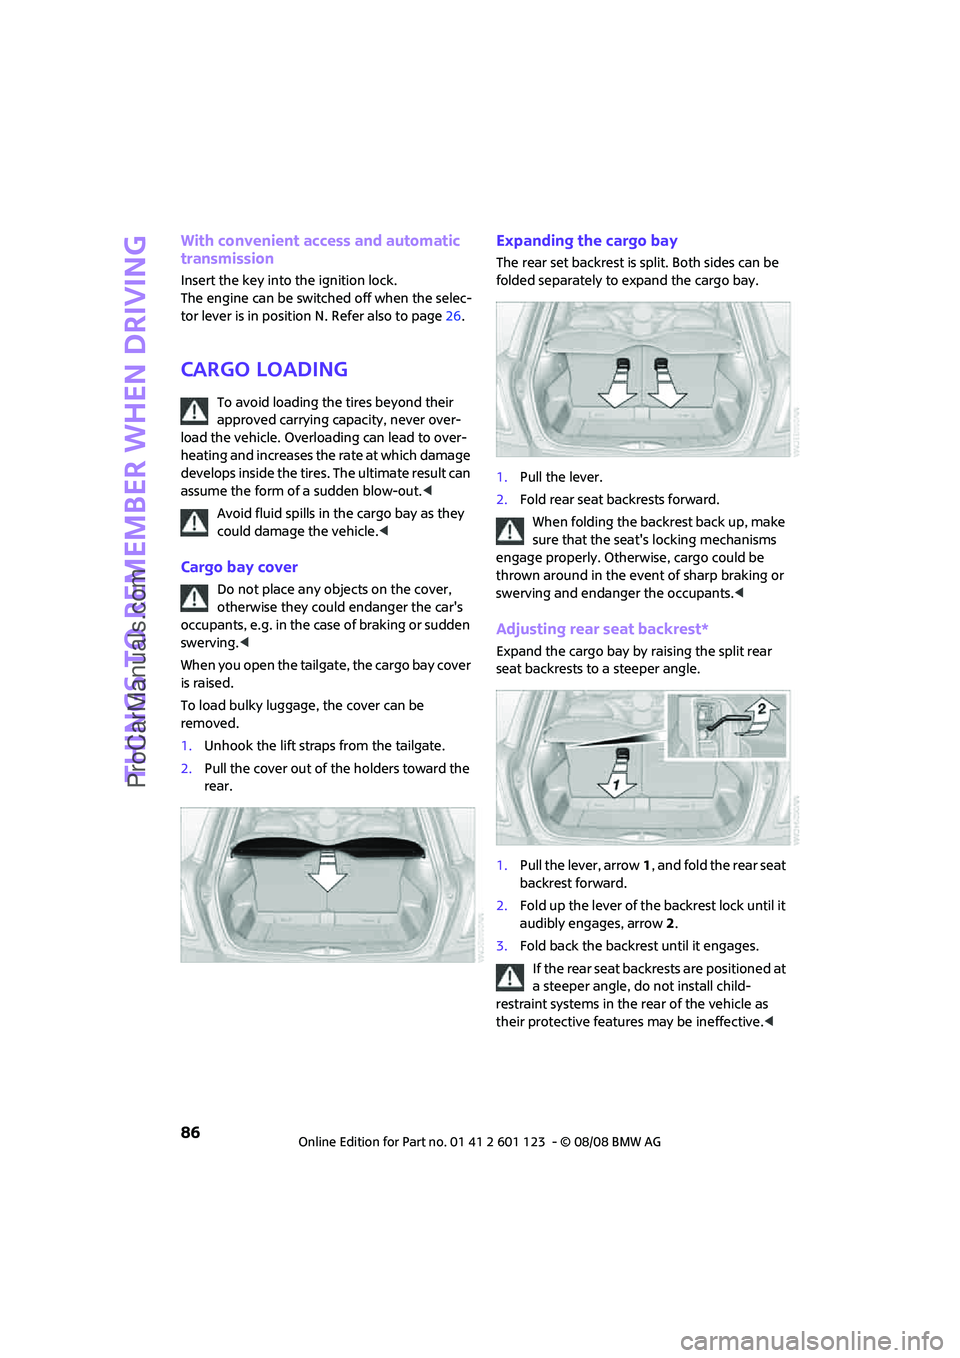 MINI COOPER 2009  Owners Manual Things to remember when driving
86
With convenient access and automatic 
transmission
Insert the key into the ignition lock.
The engine can be switched off when the selec-
tor lever is in position N. 